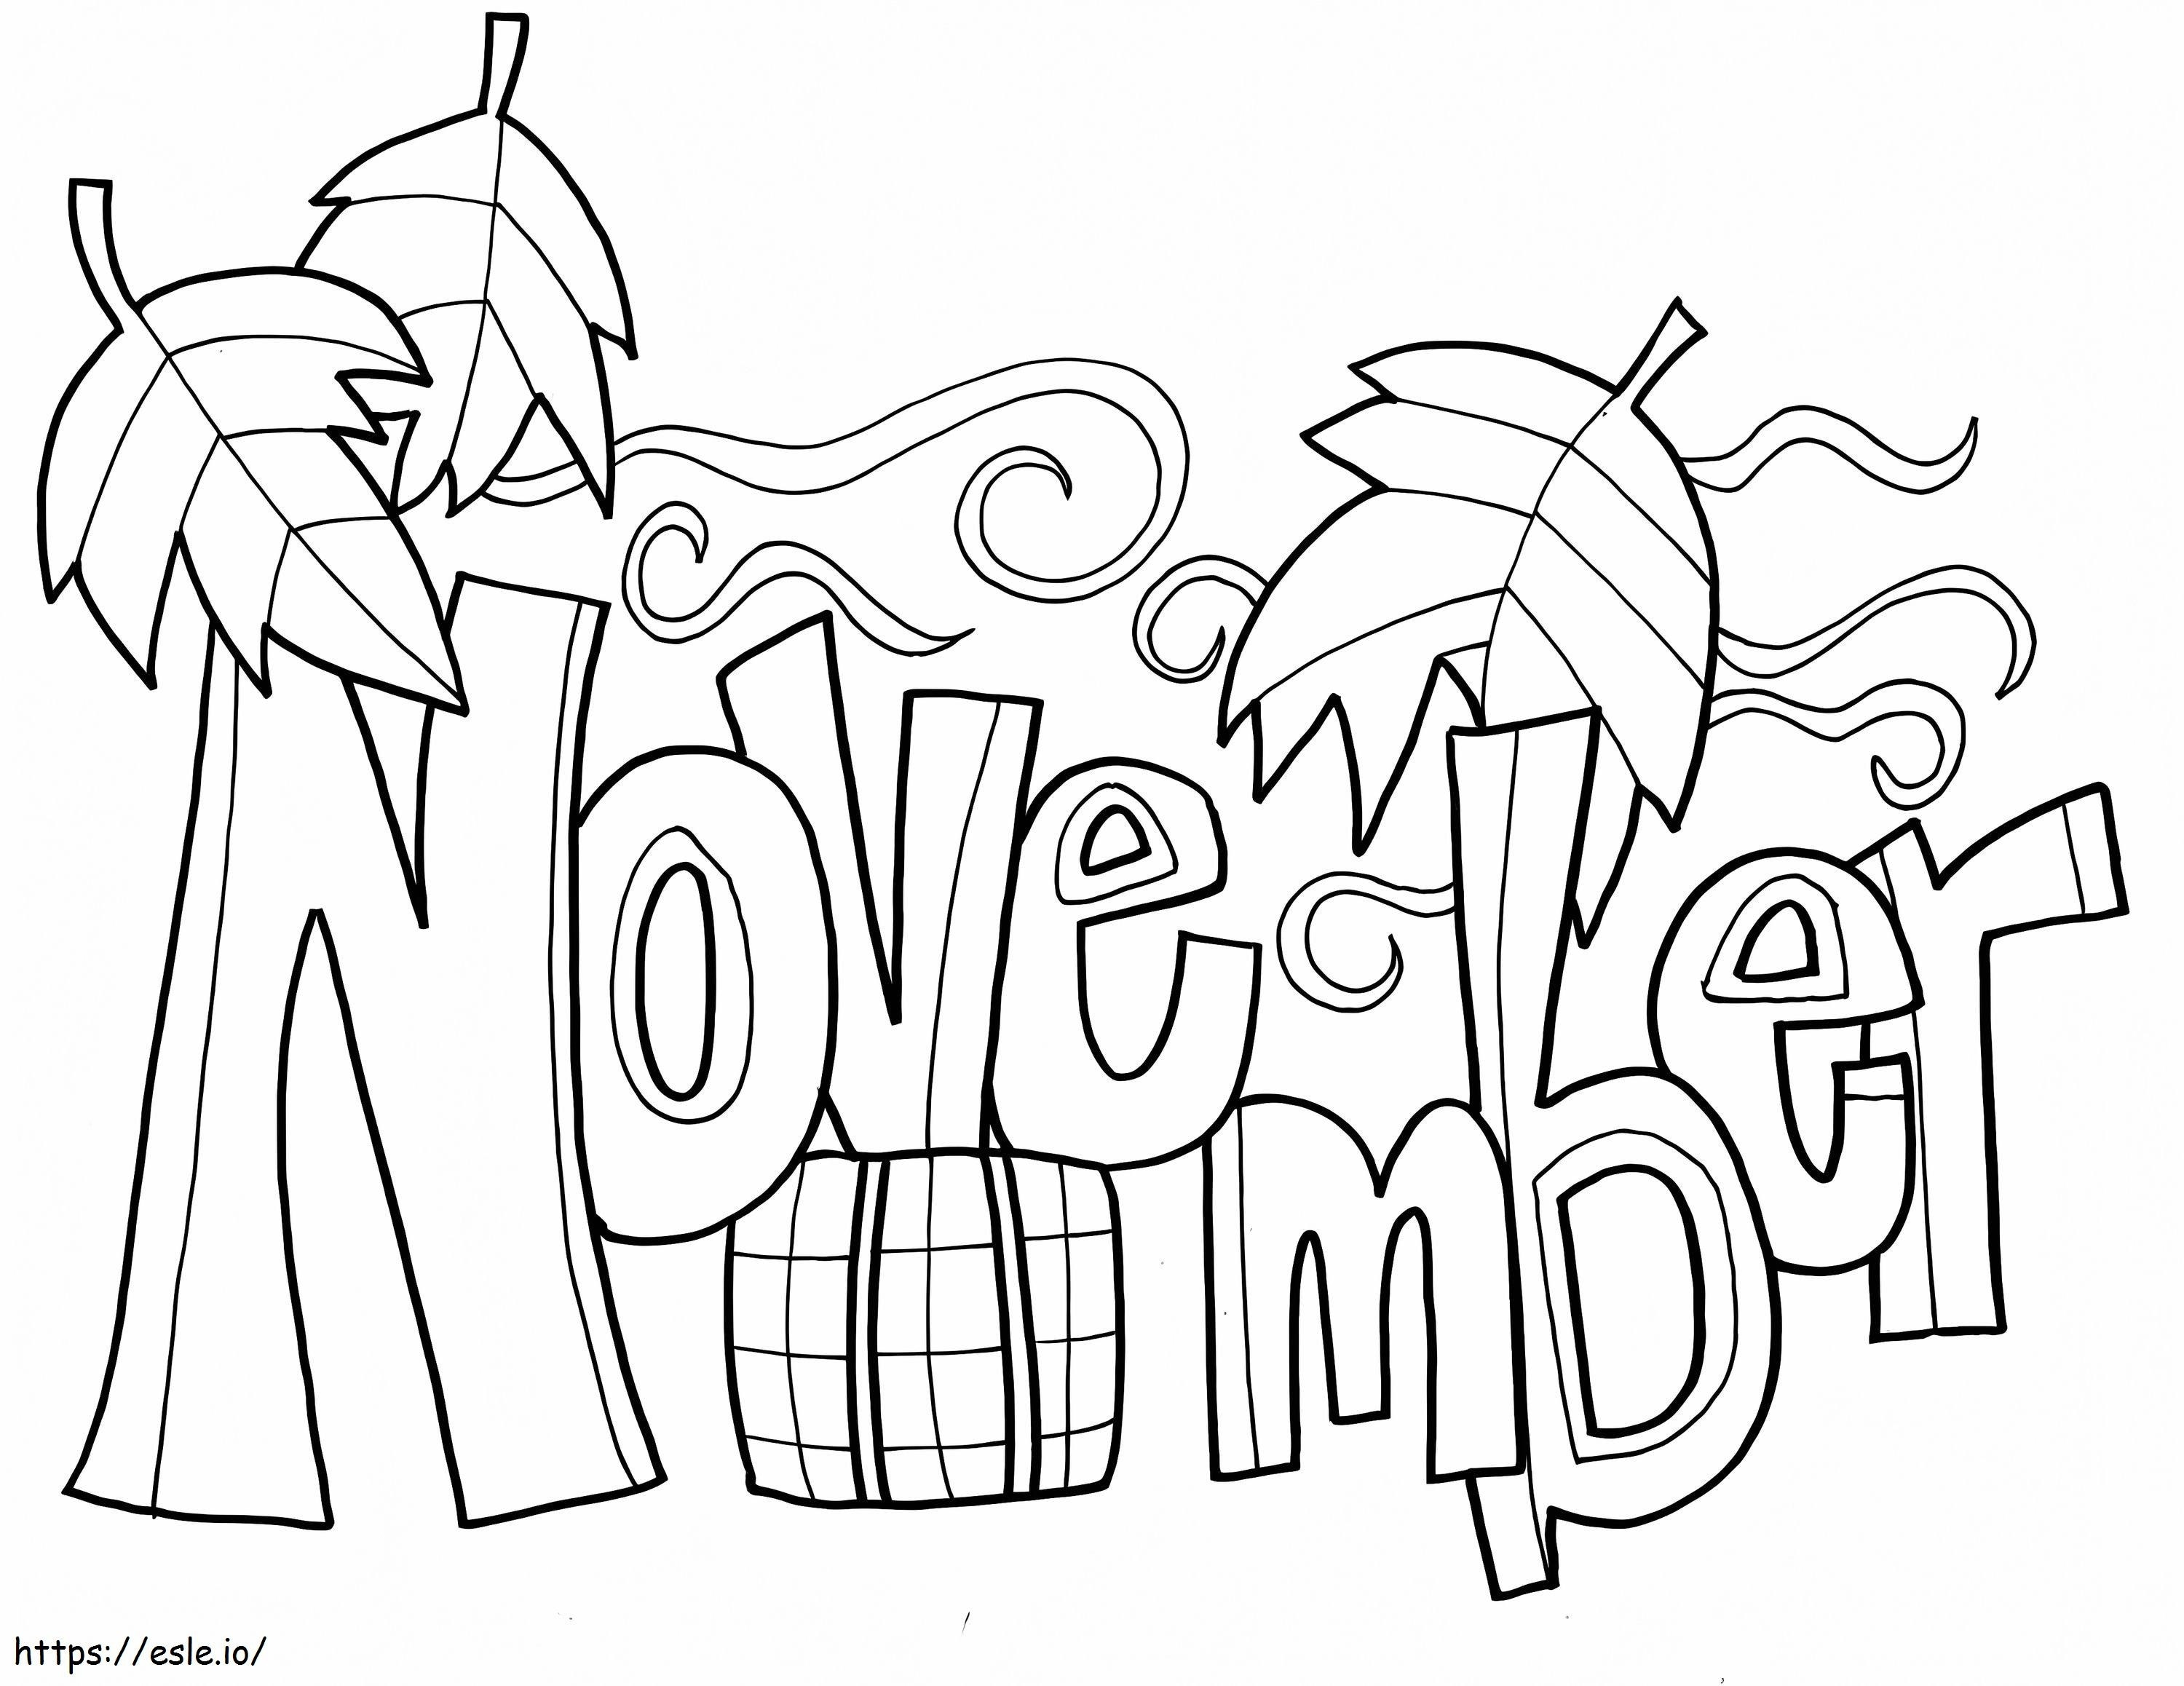 Hellow November coloring page